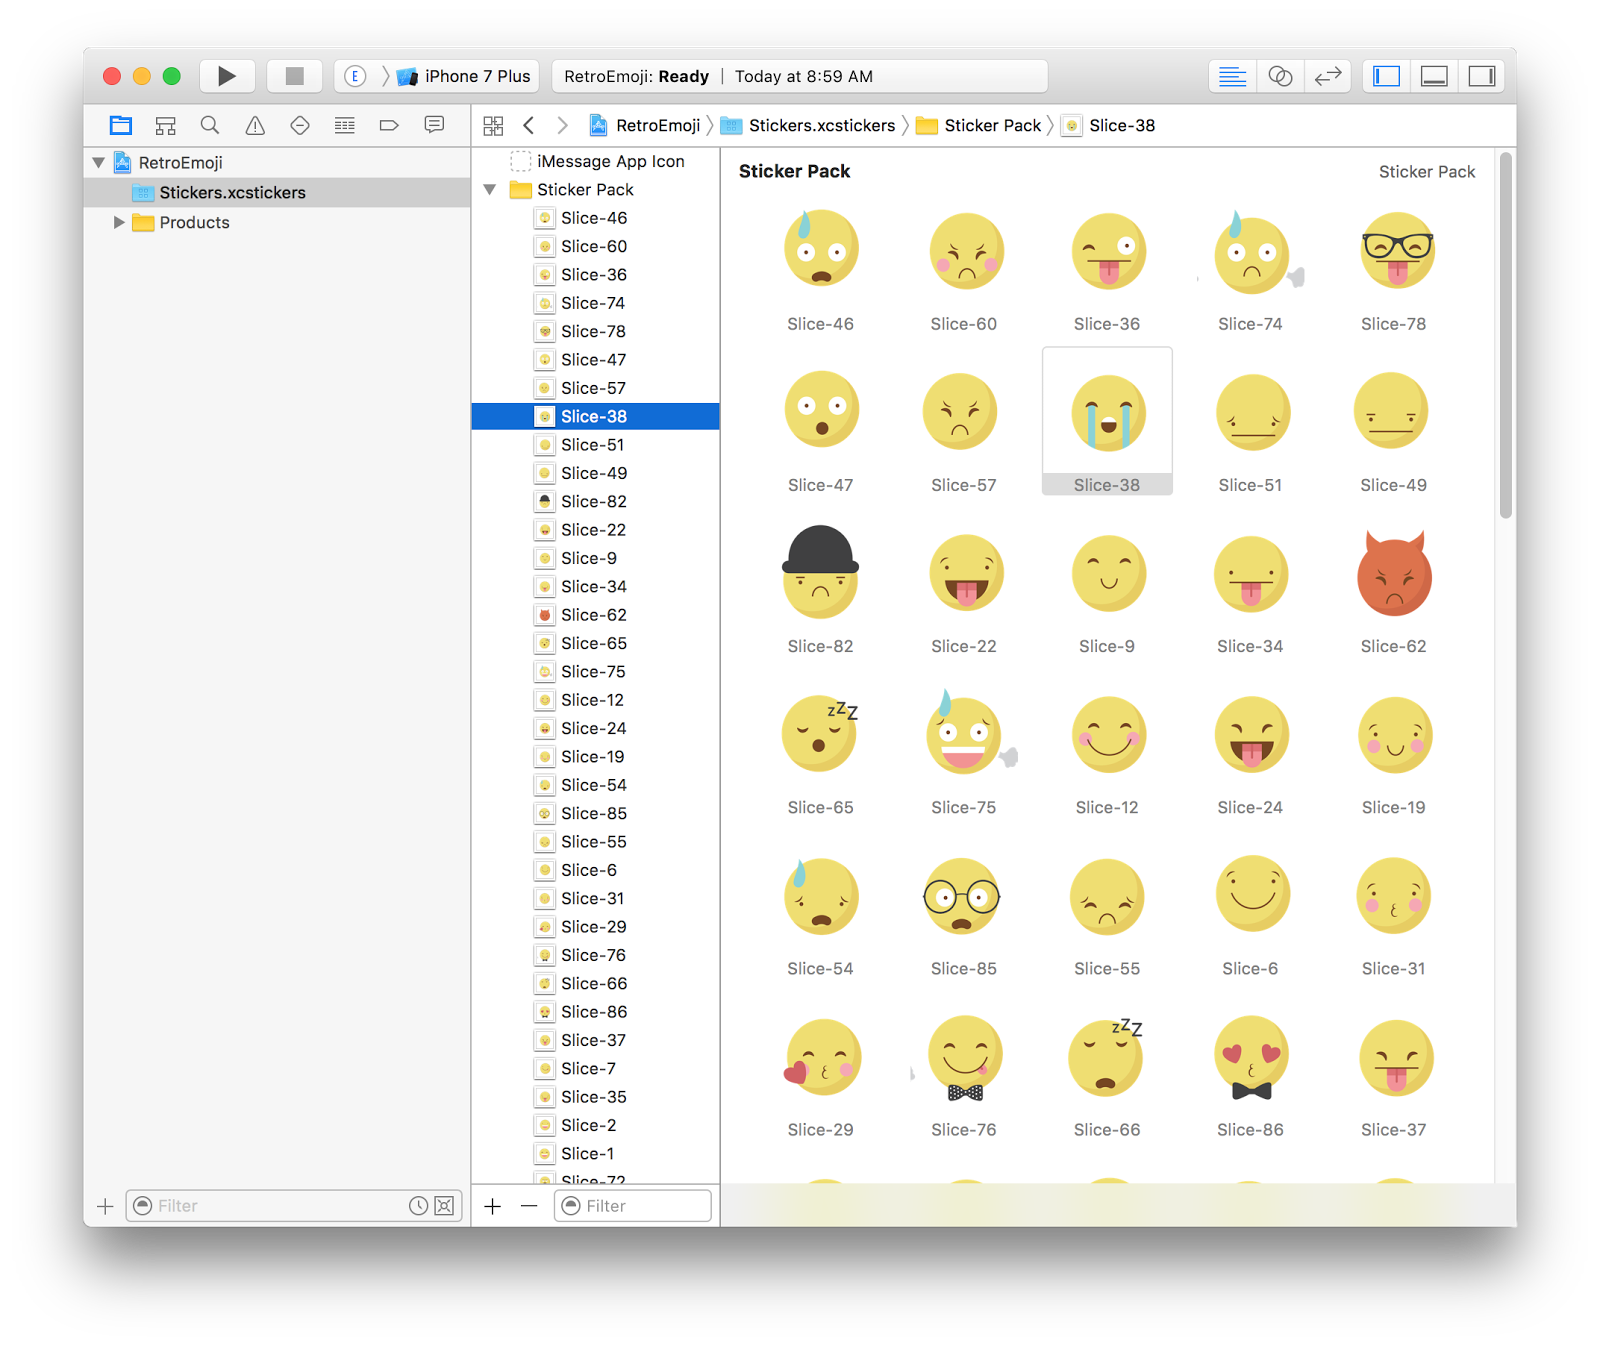 Figure 3: Displaying a list of emojis as part of the Sticker Pack App 